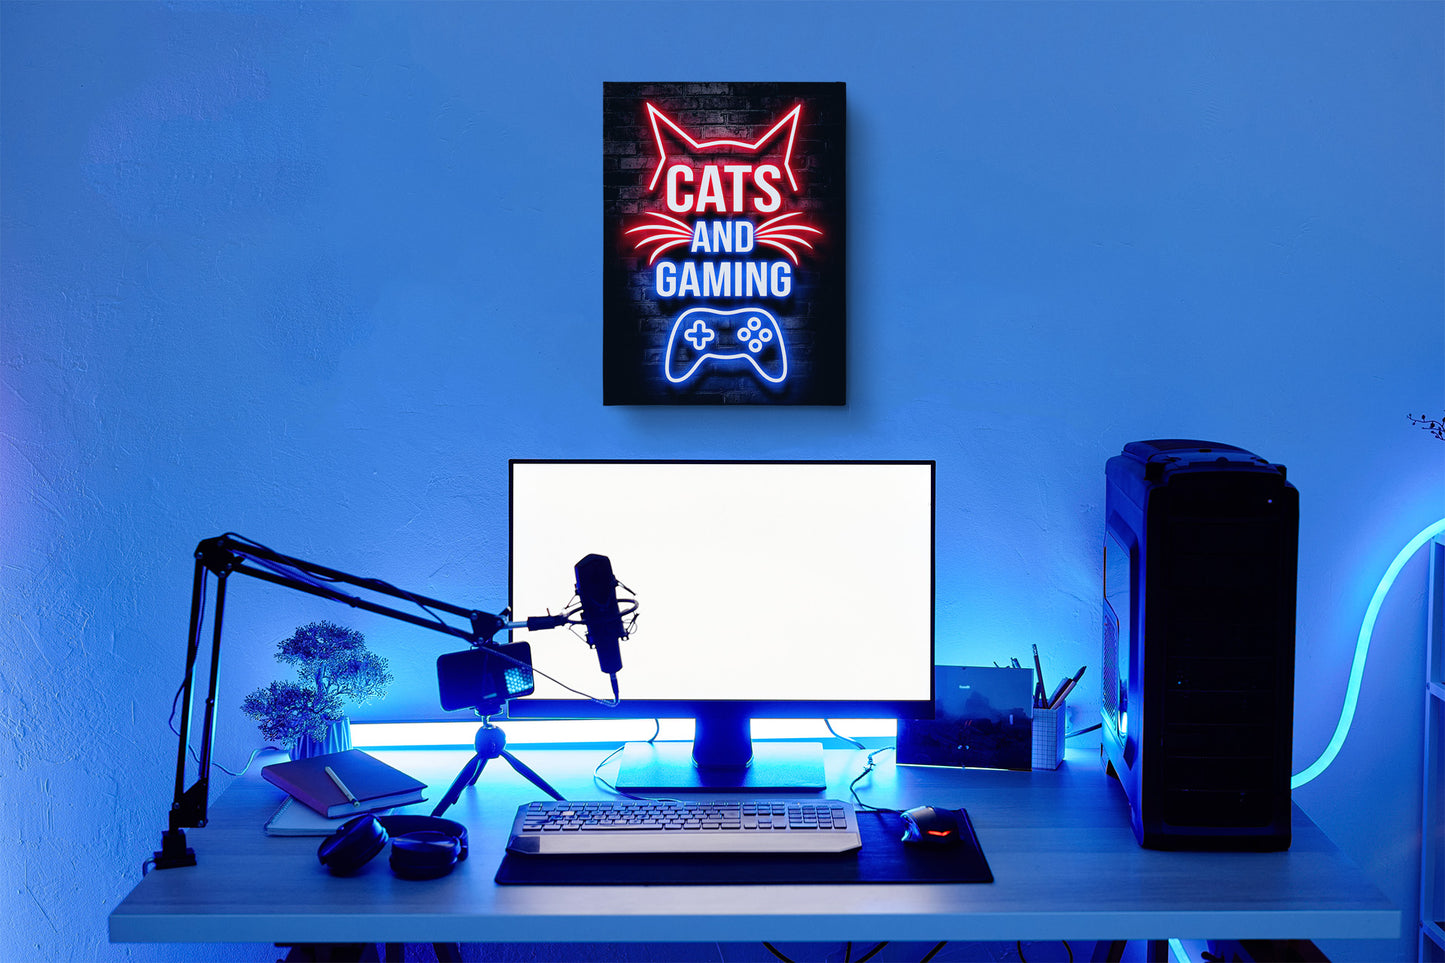 Cats and Gaming